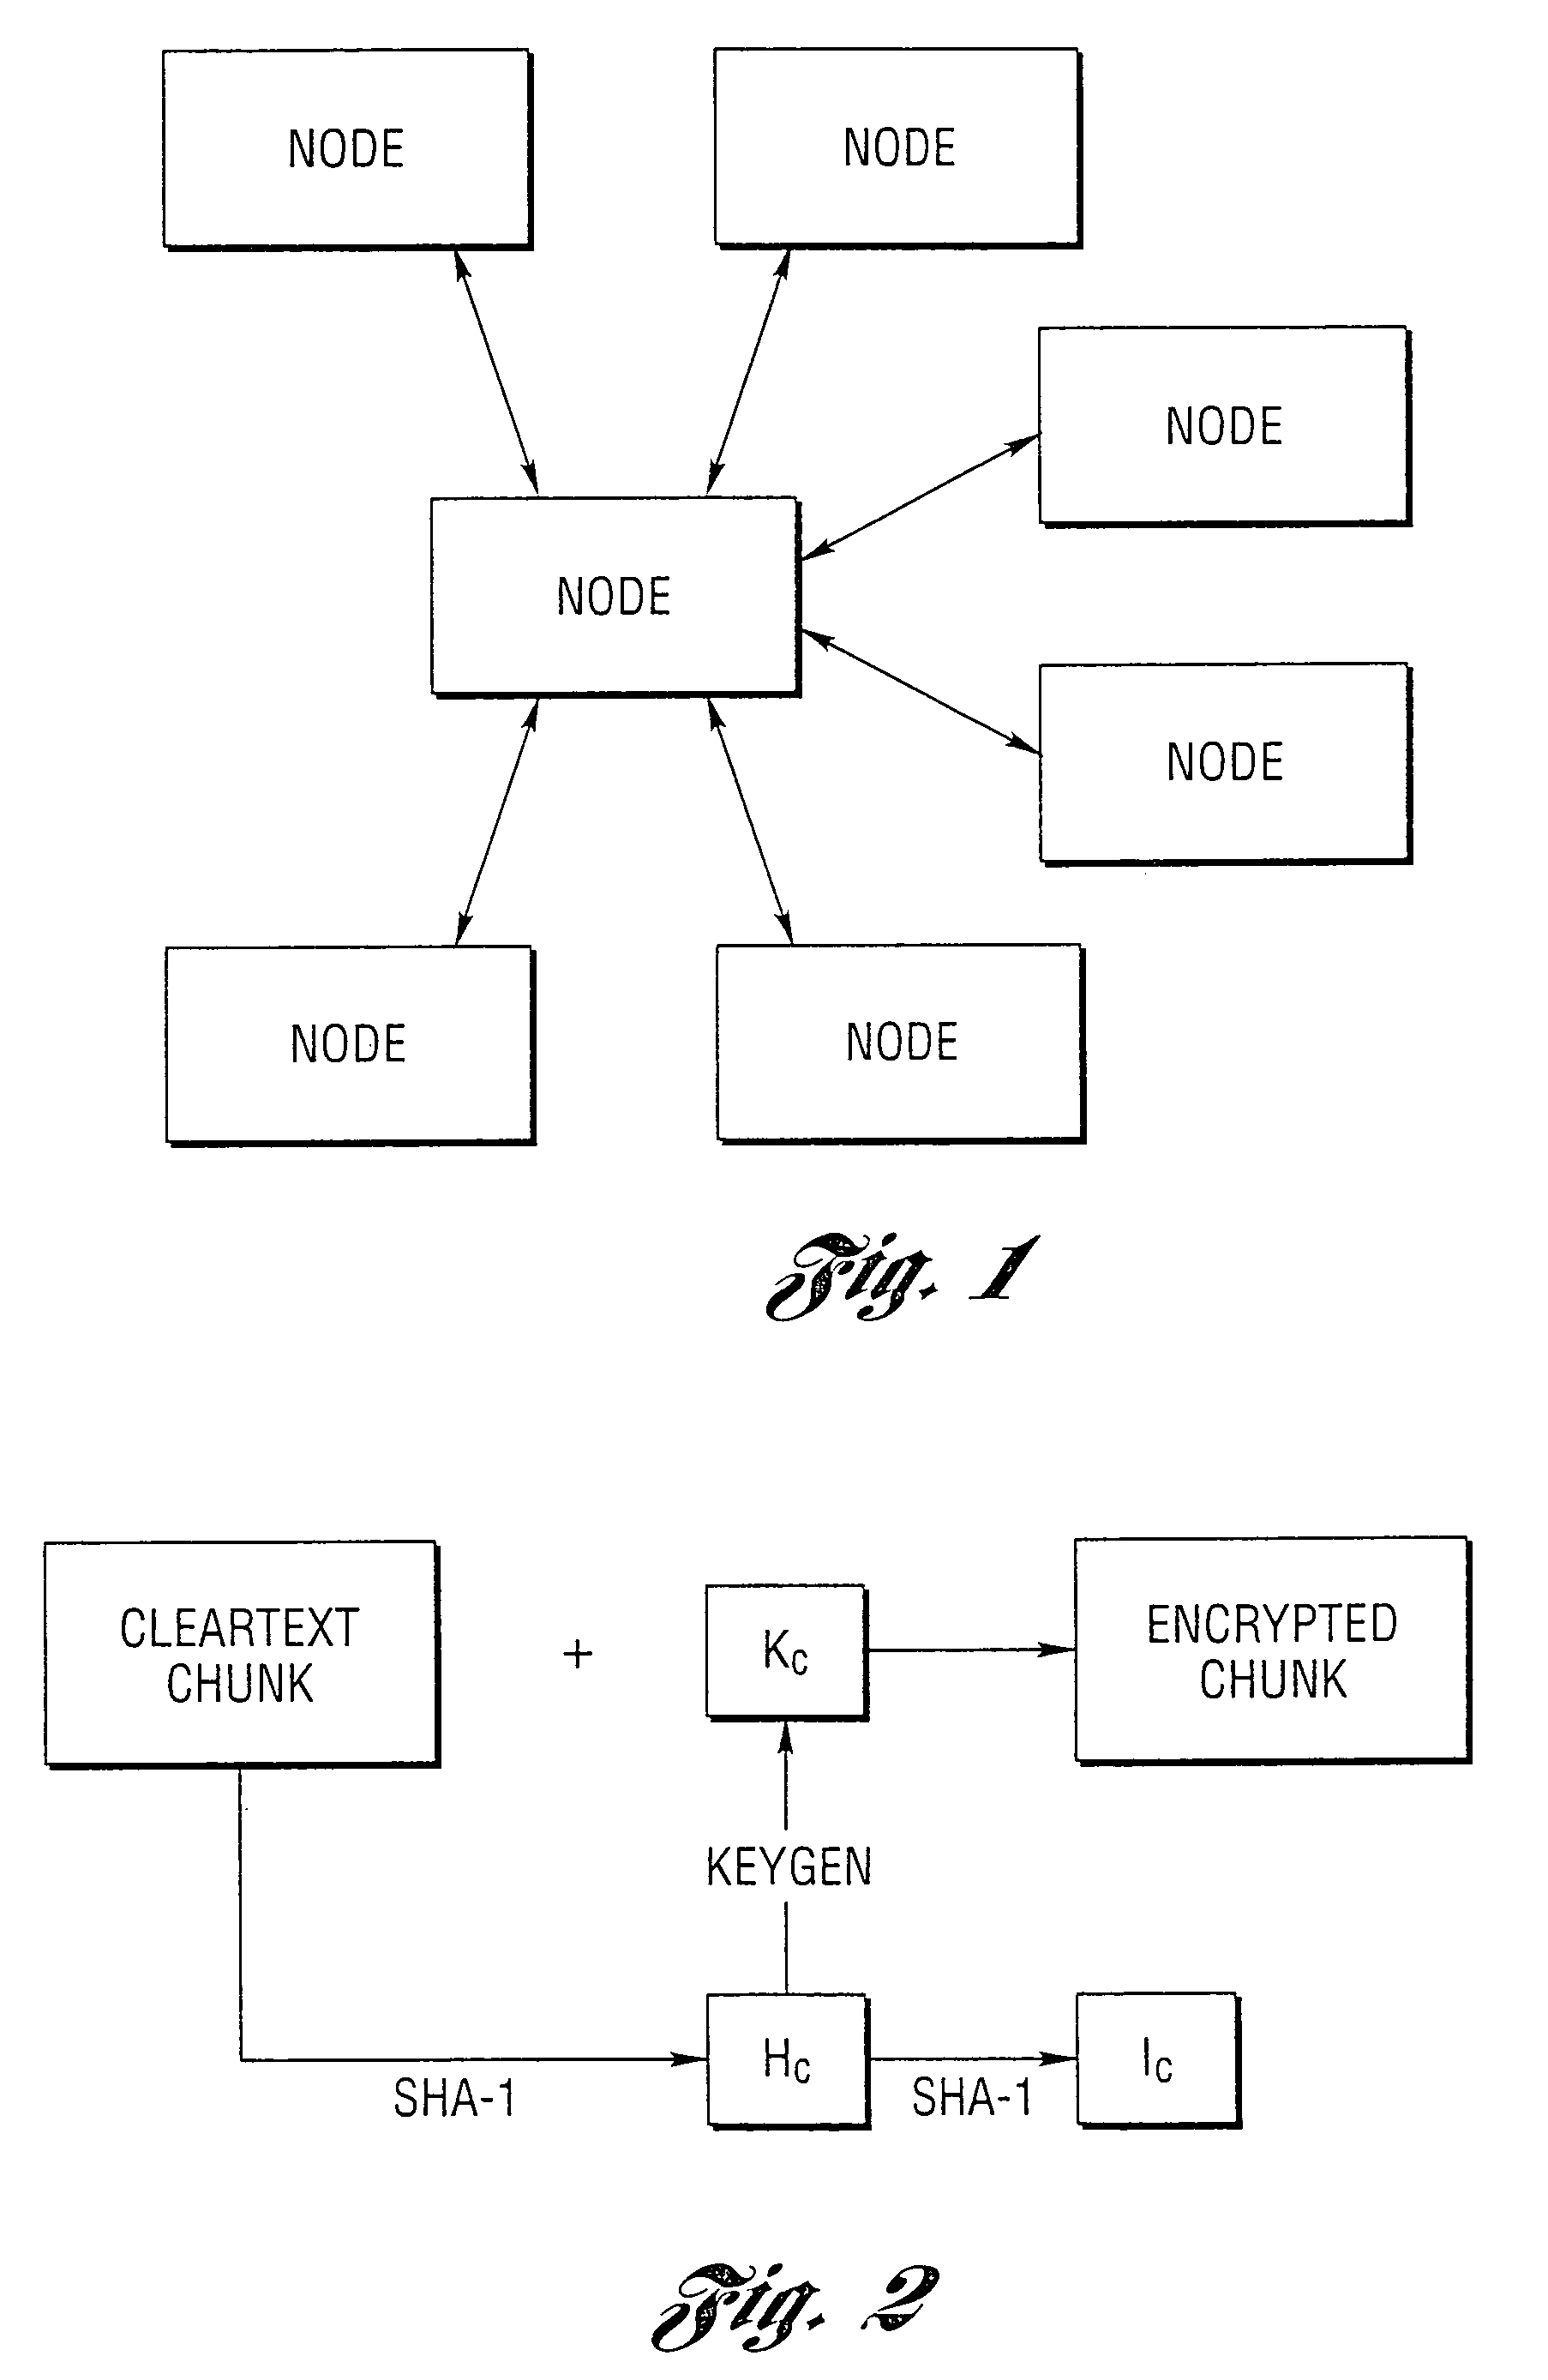 Peer-to-peer method and system for performing and managing backups in a network of nodes